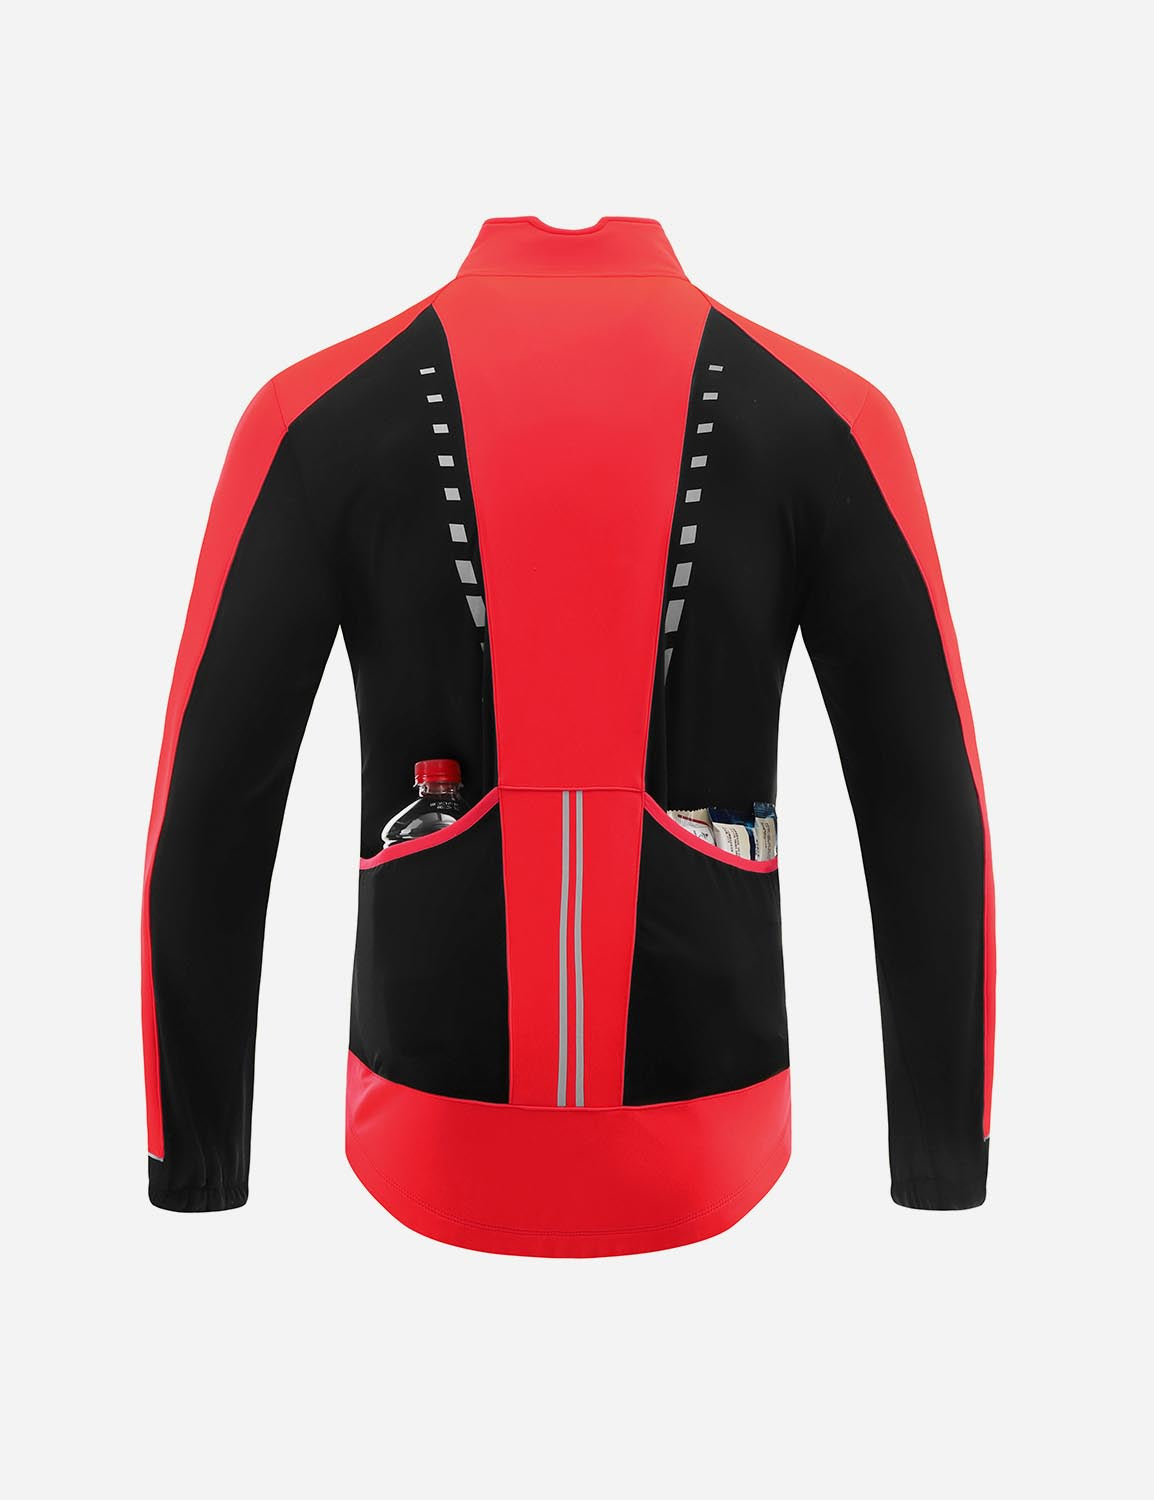 Baleaf Men's Windproof Thermal Softshell Cycling Jacket cai044 Chinese Red Back